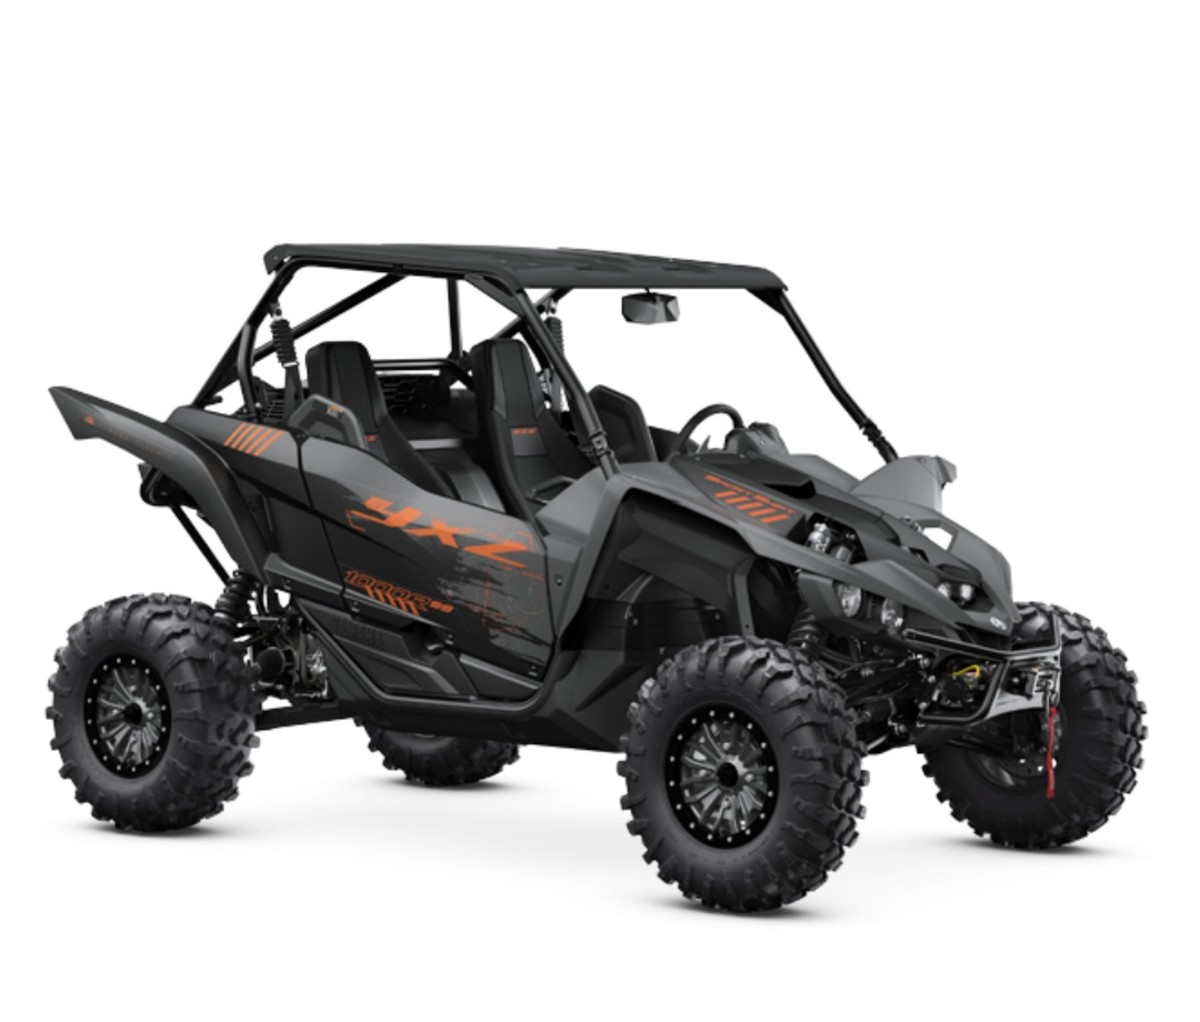 Yamaha YXZ1000R XT-R in black and orange on a white background. side-by-side UTVs